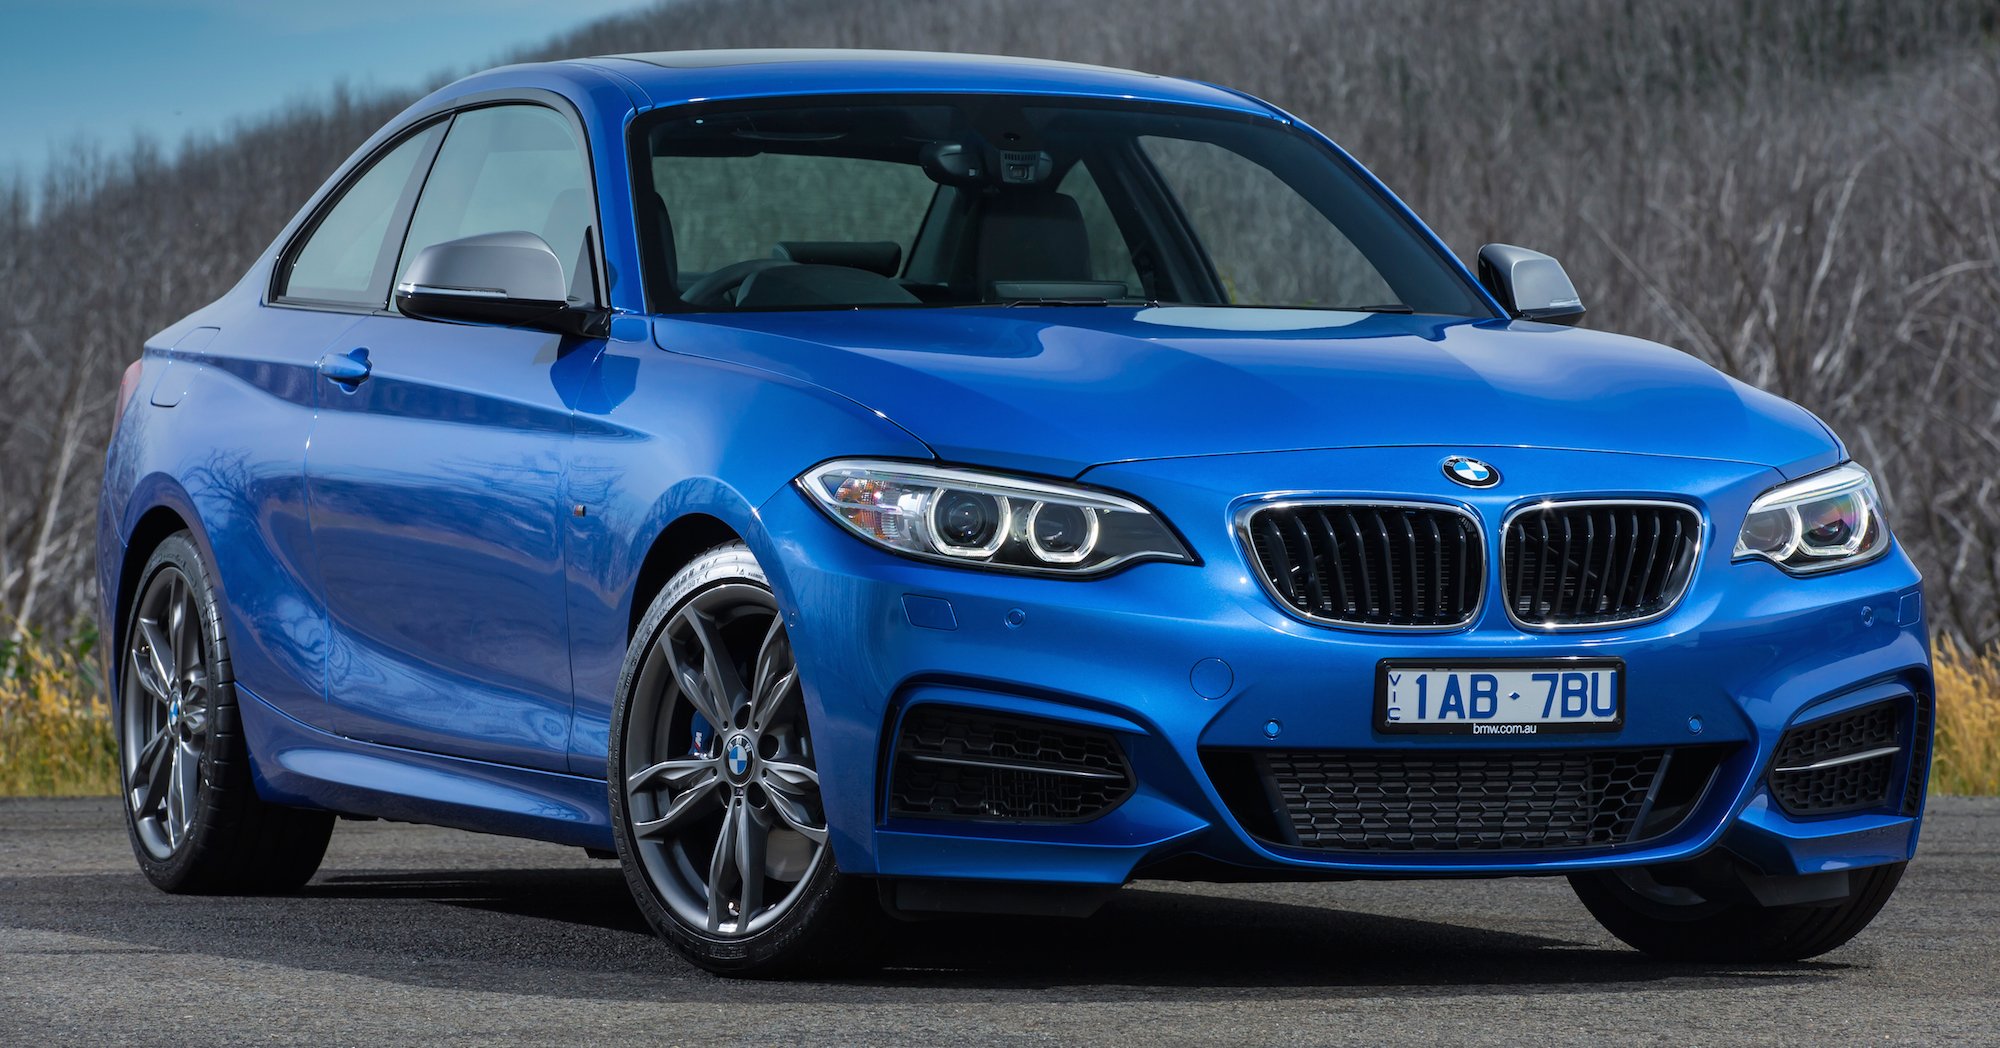 2016 BMW 2 Series Coupe and Convertible pricing and specification